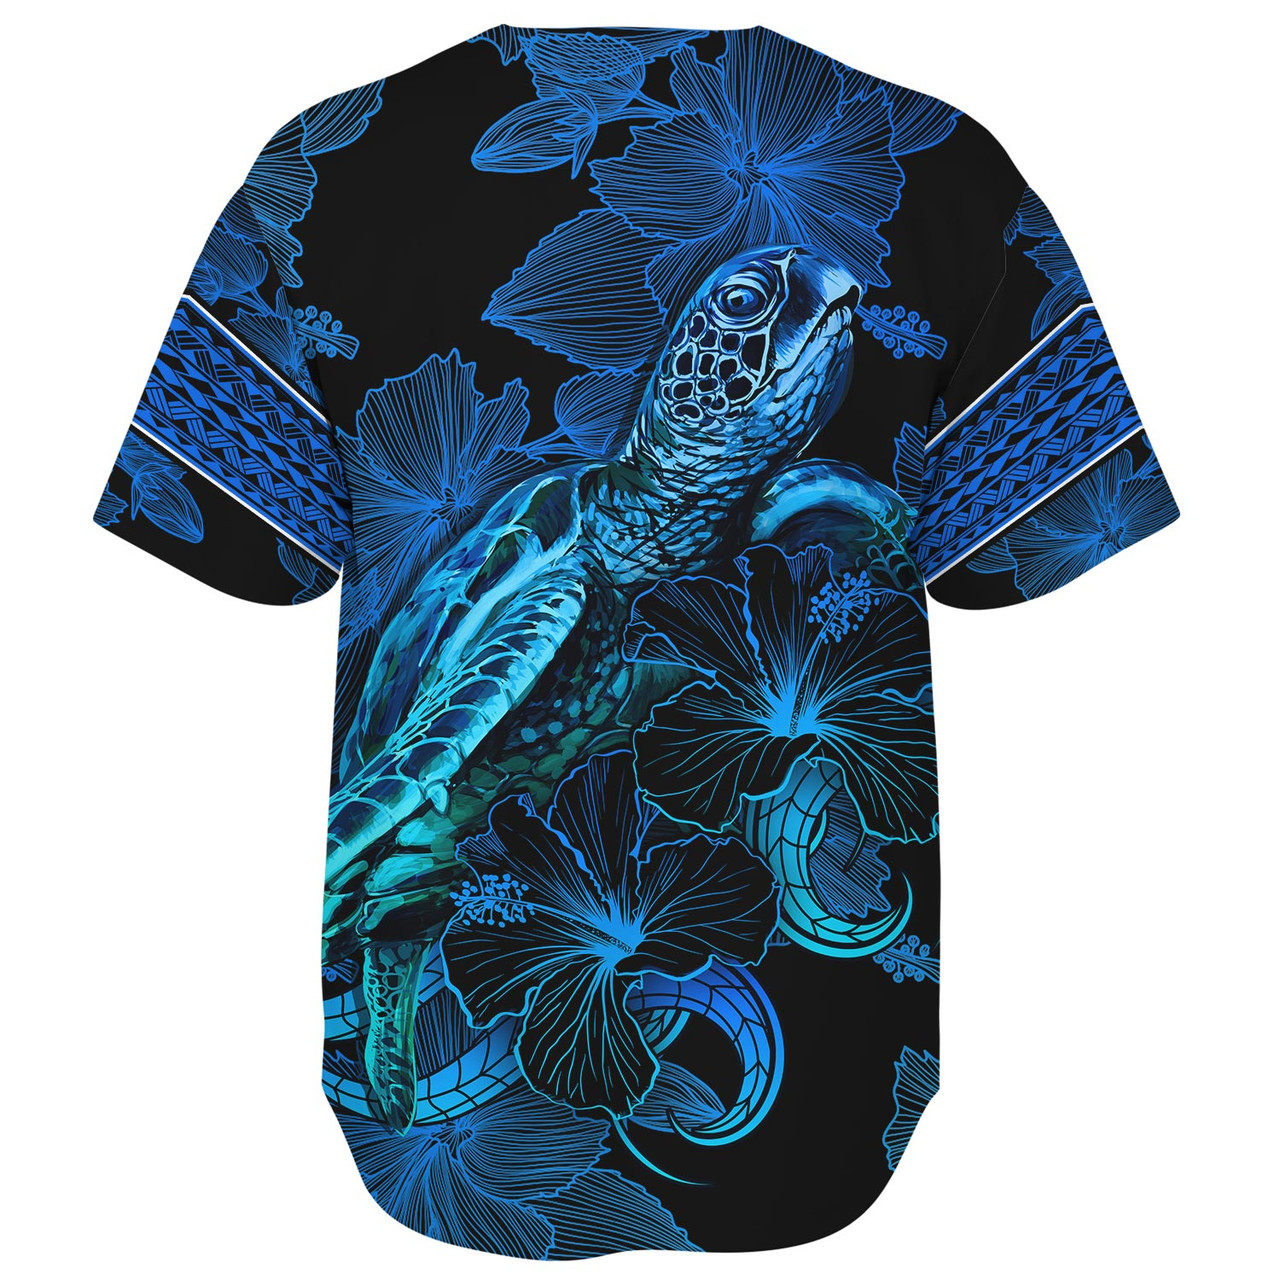 New Caledonia Baseball Shirt Sea Turtle With Blooming Hibiscus Flowers Tribal Blue